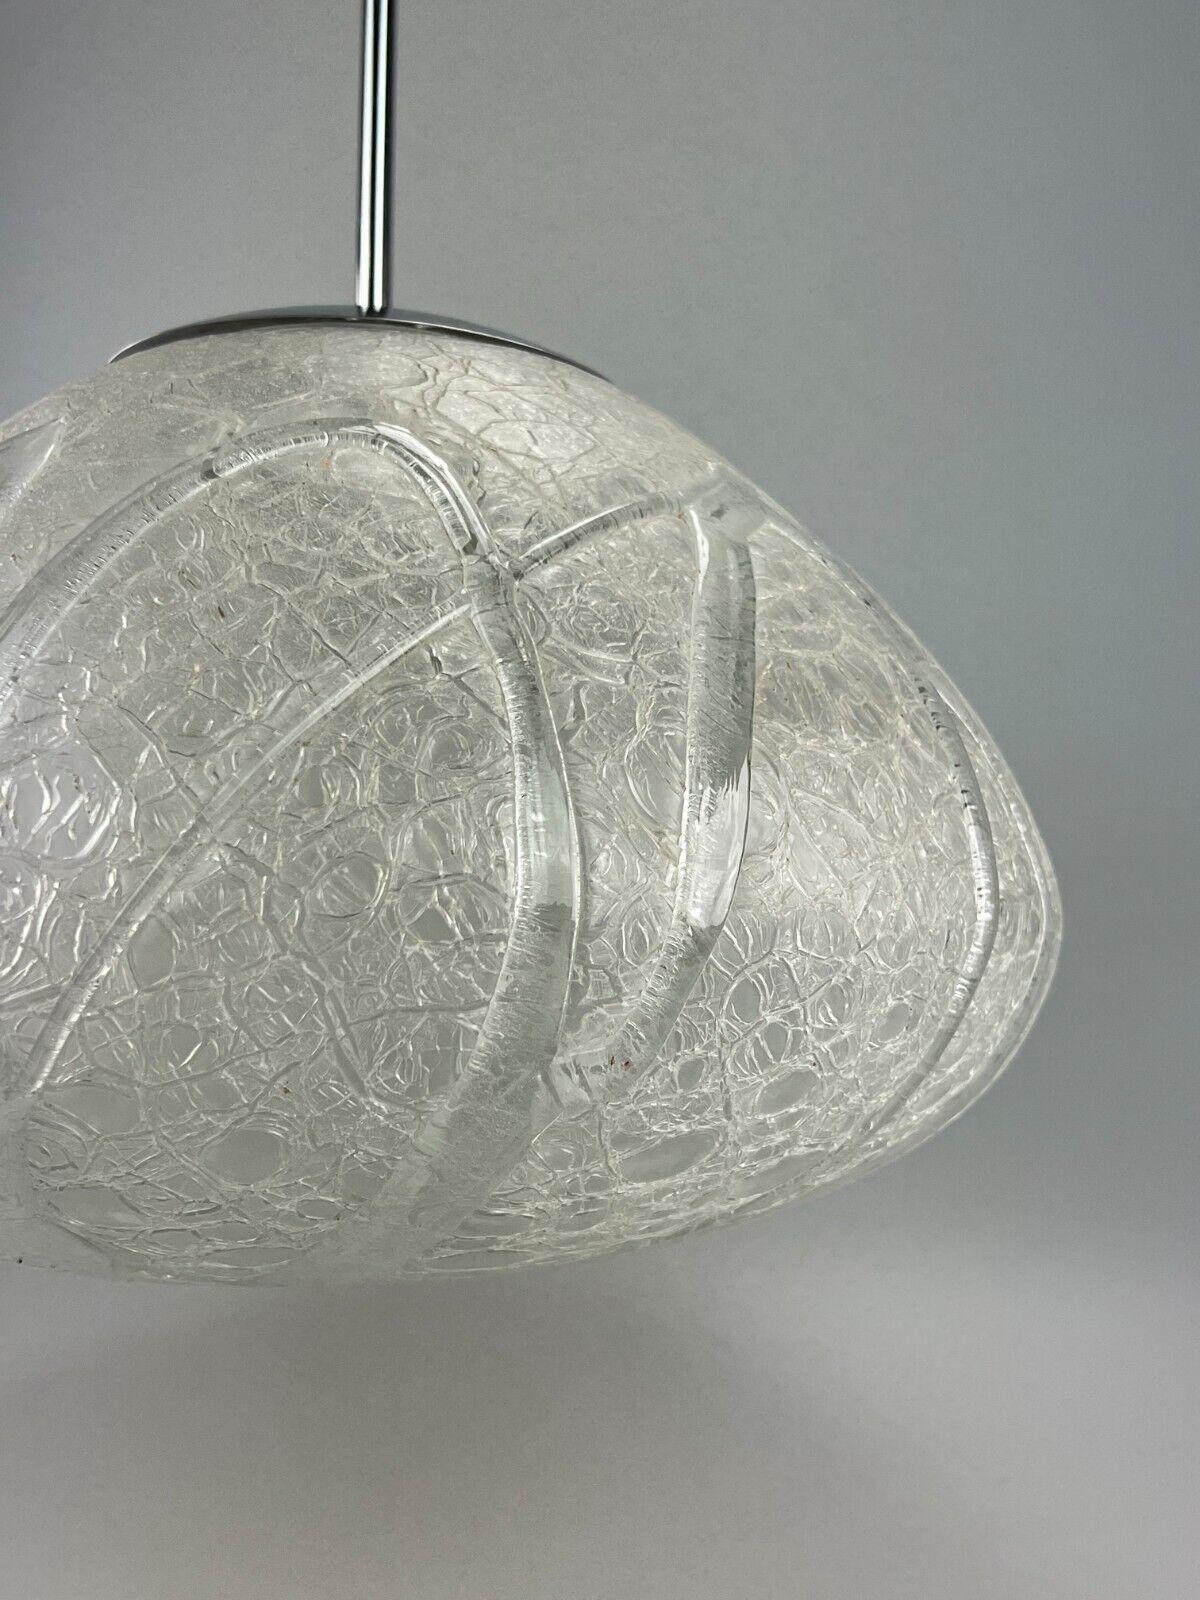 60s 70s Lamp Light Ceiling Lamp Hanging Lamp Doria Glas Space Age Design In Good Condition For Sale In Neuenkirchen, NI